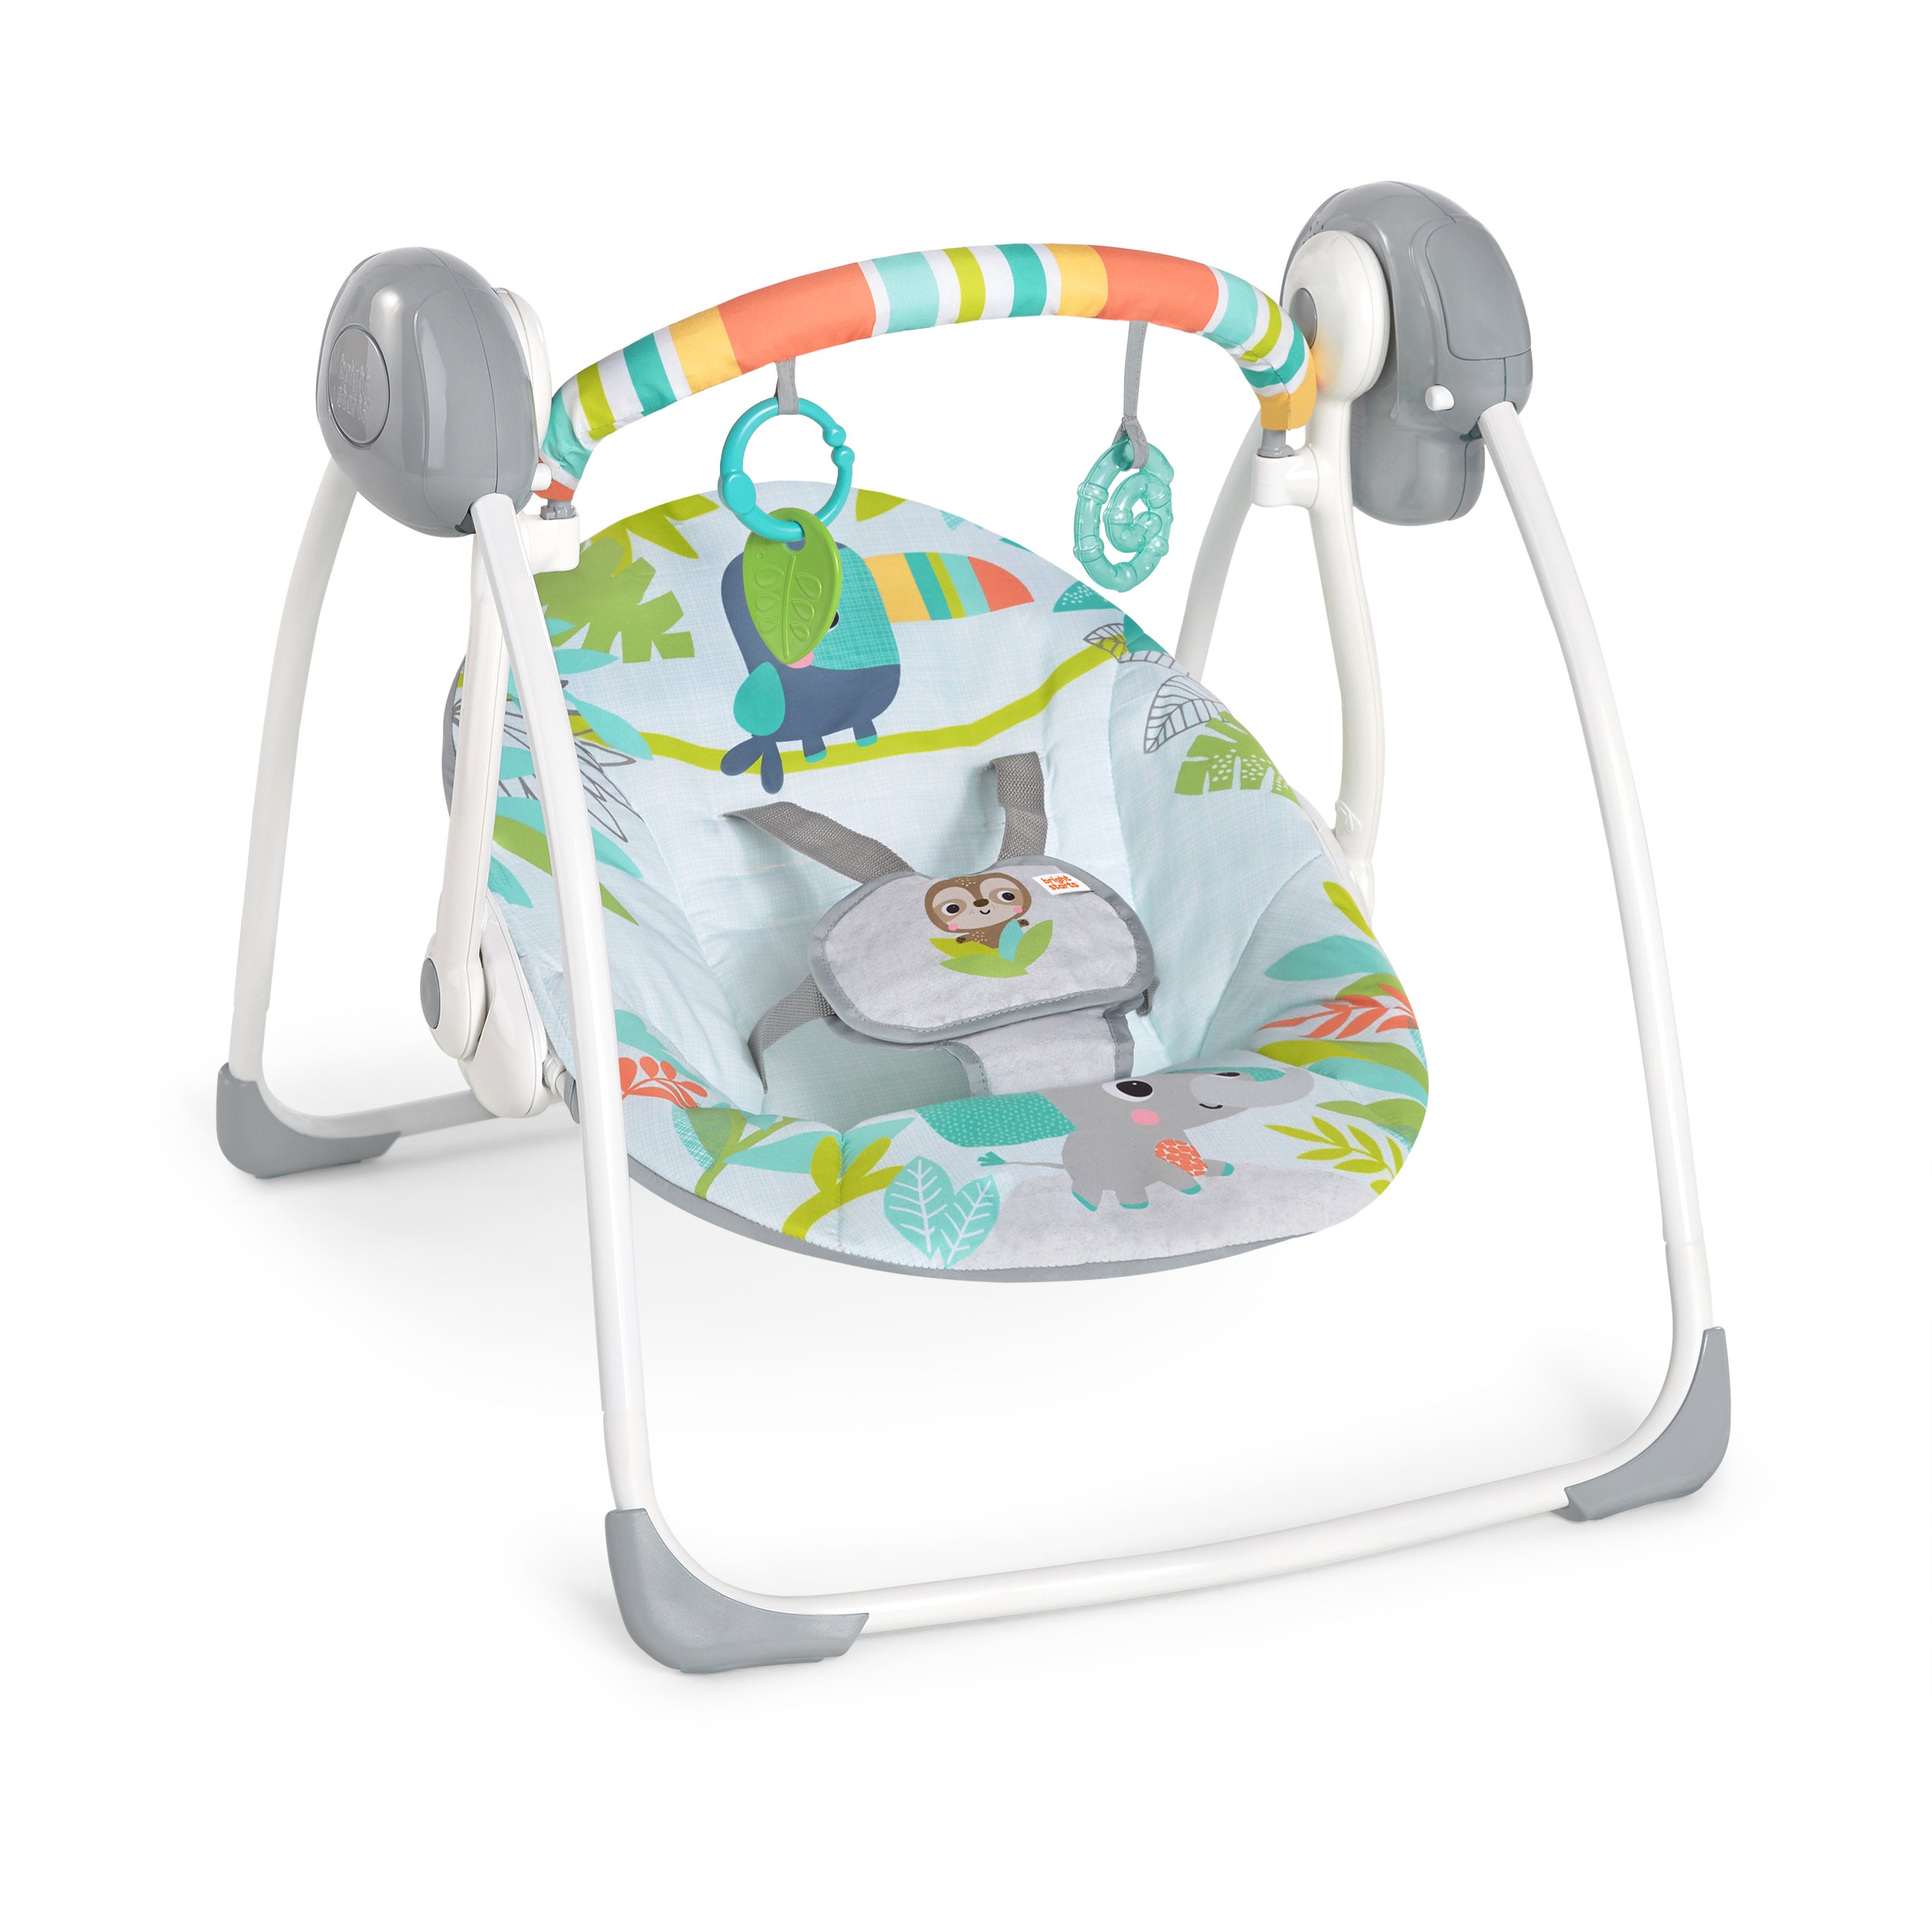 Bright Starts Playful Paradise Portable Compact Automatic Baby Swing with  Music, Unisex, Newborn +